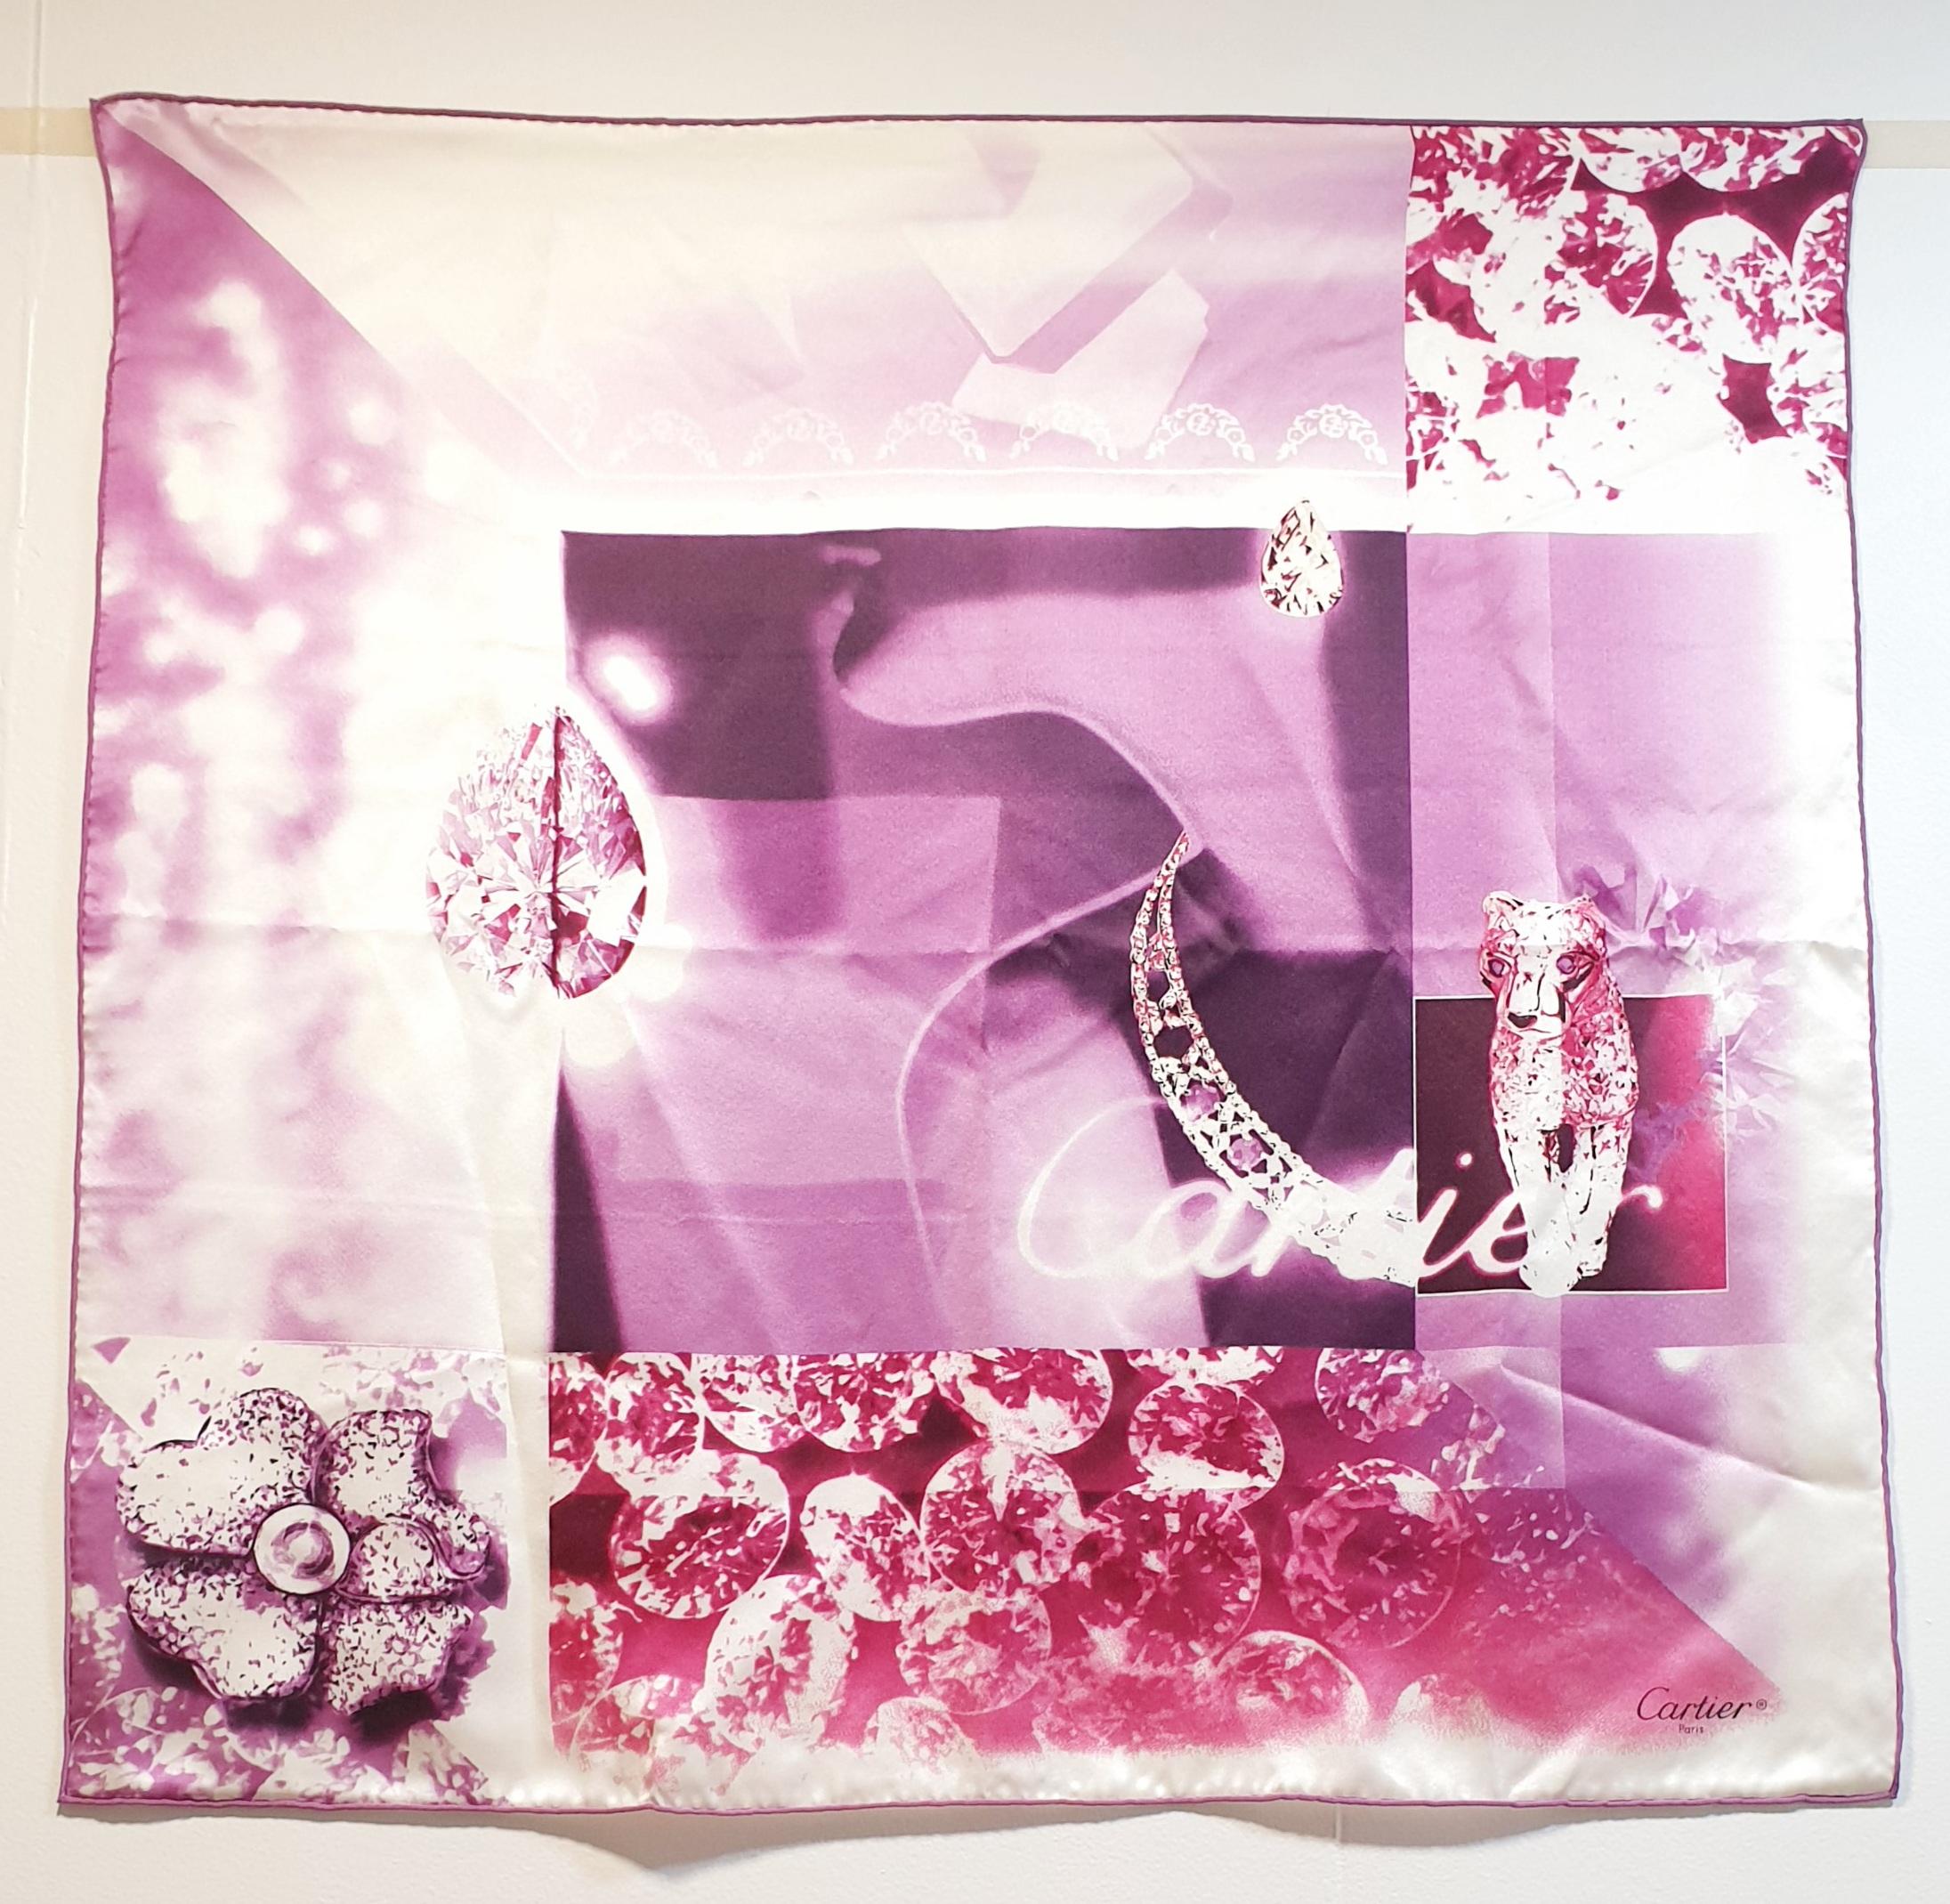 Cartier pink Panther Garden silk  70x70 square scarf
New Never used rest of boutique stock
 Dark pink Panther Garden silk twill square scarf
 Dimensions: 70 cm x 70cm / 27.55 x 27.55 inches 

The Cartier Panther is a symbol and icon that defines the